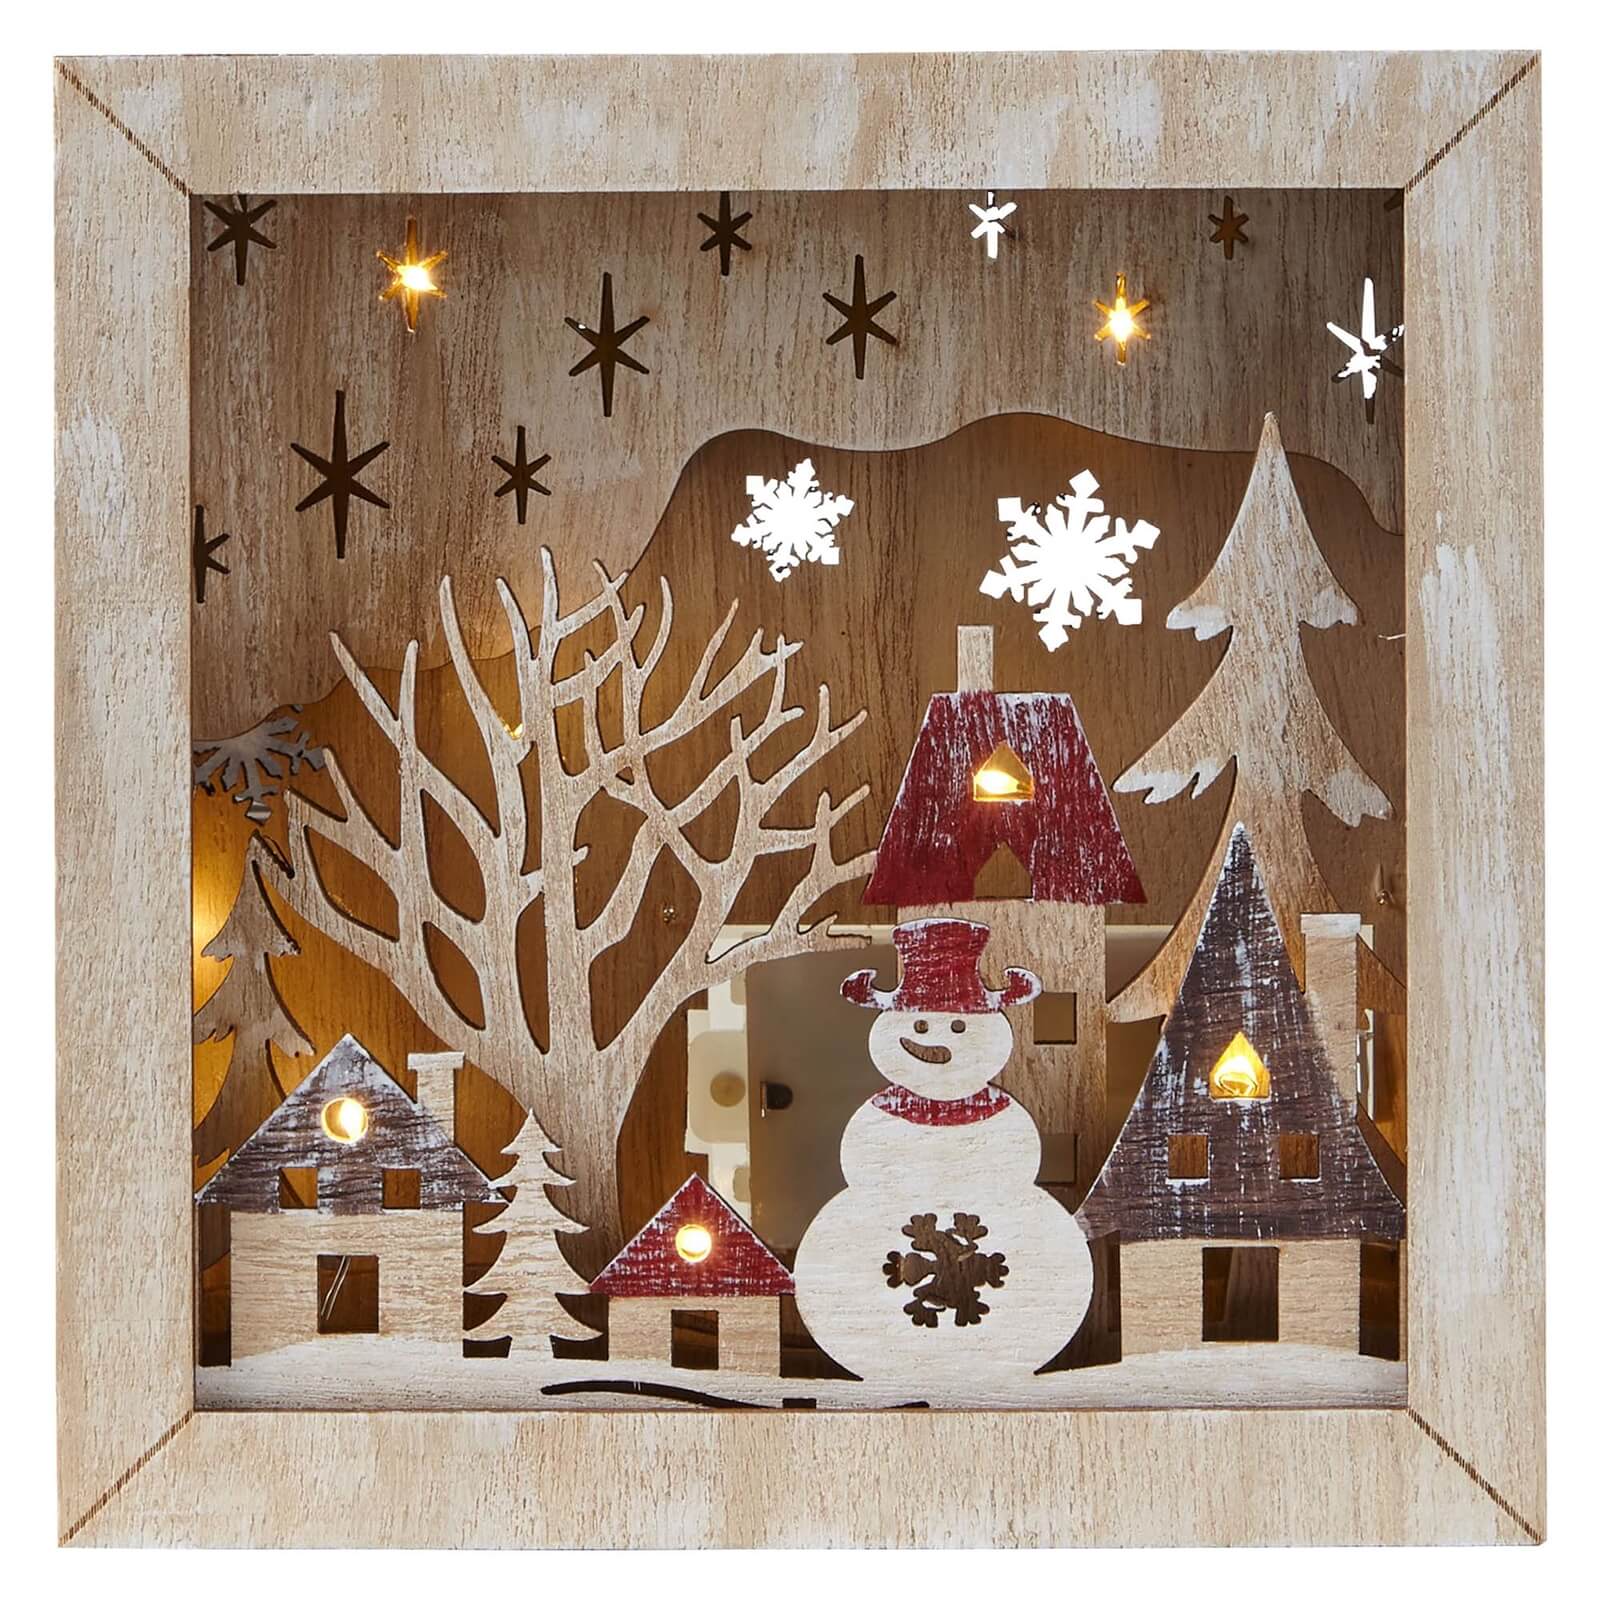 Wooden Snowman Scene Light Up Decoration (Battery Operated)